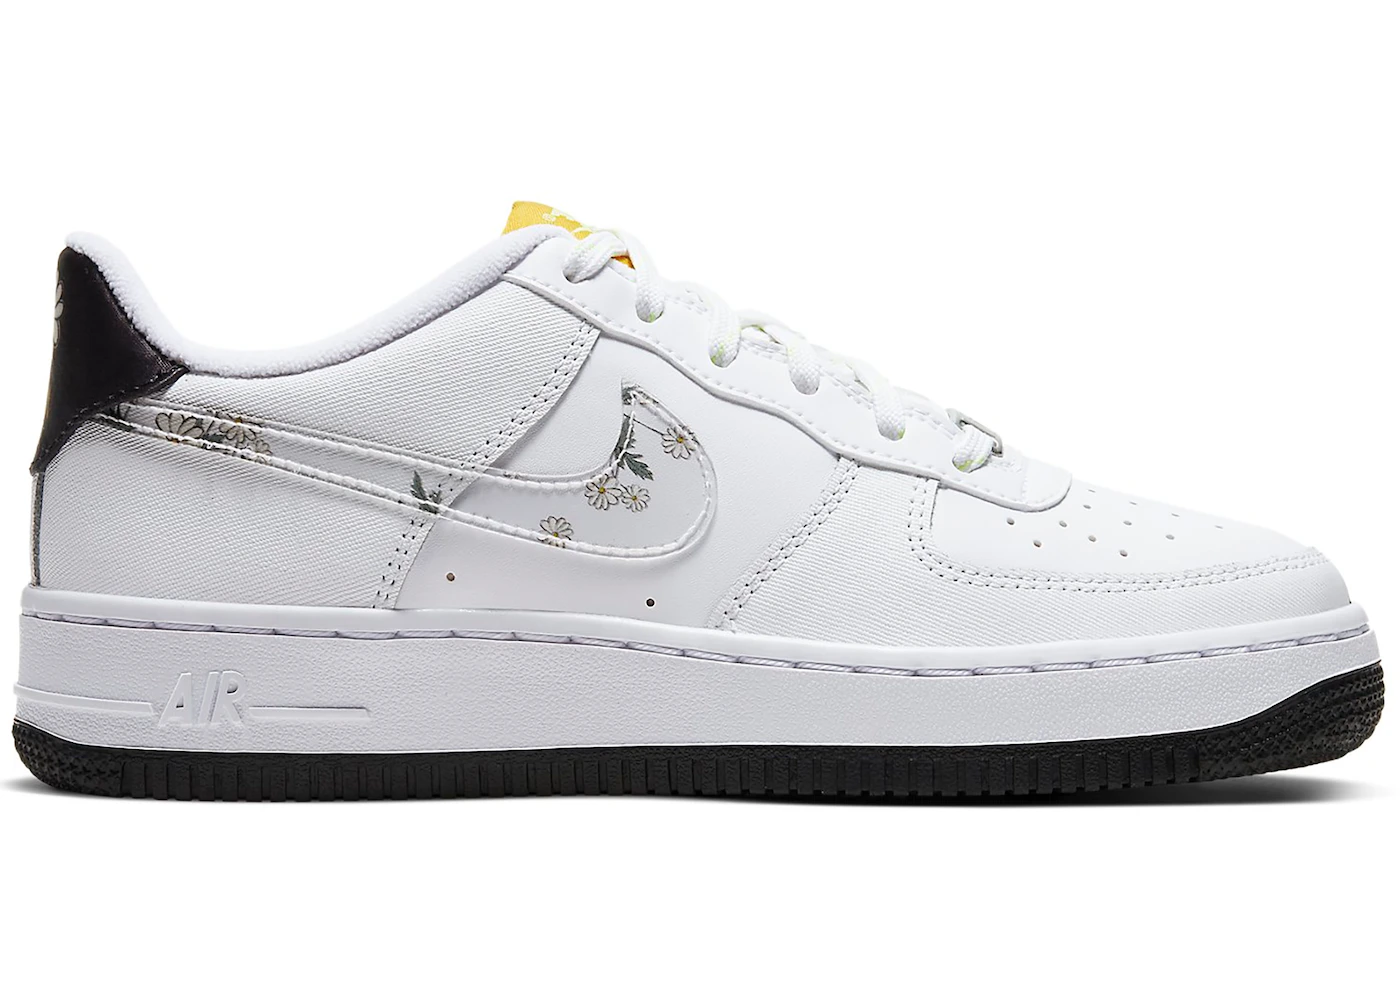 Nike Air Force 1 Low Daisy (GS) Kids' - CW5859-100 - US